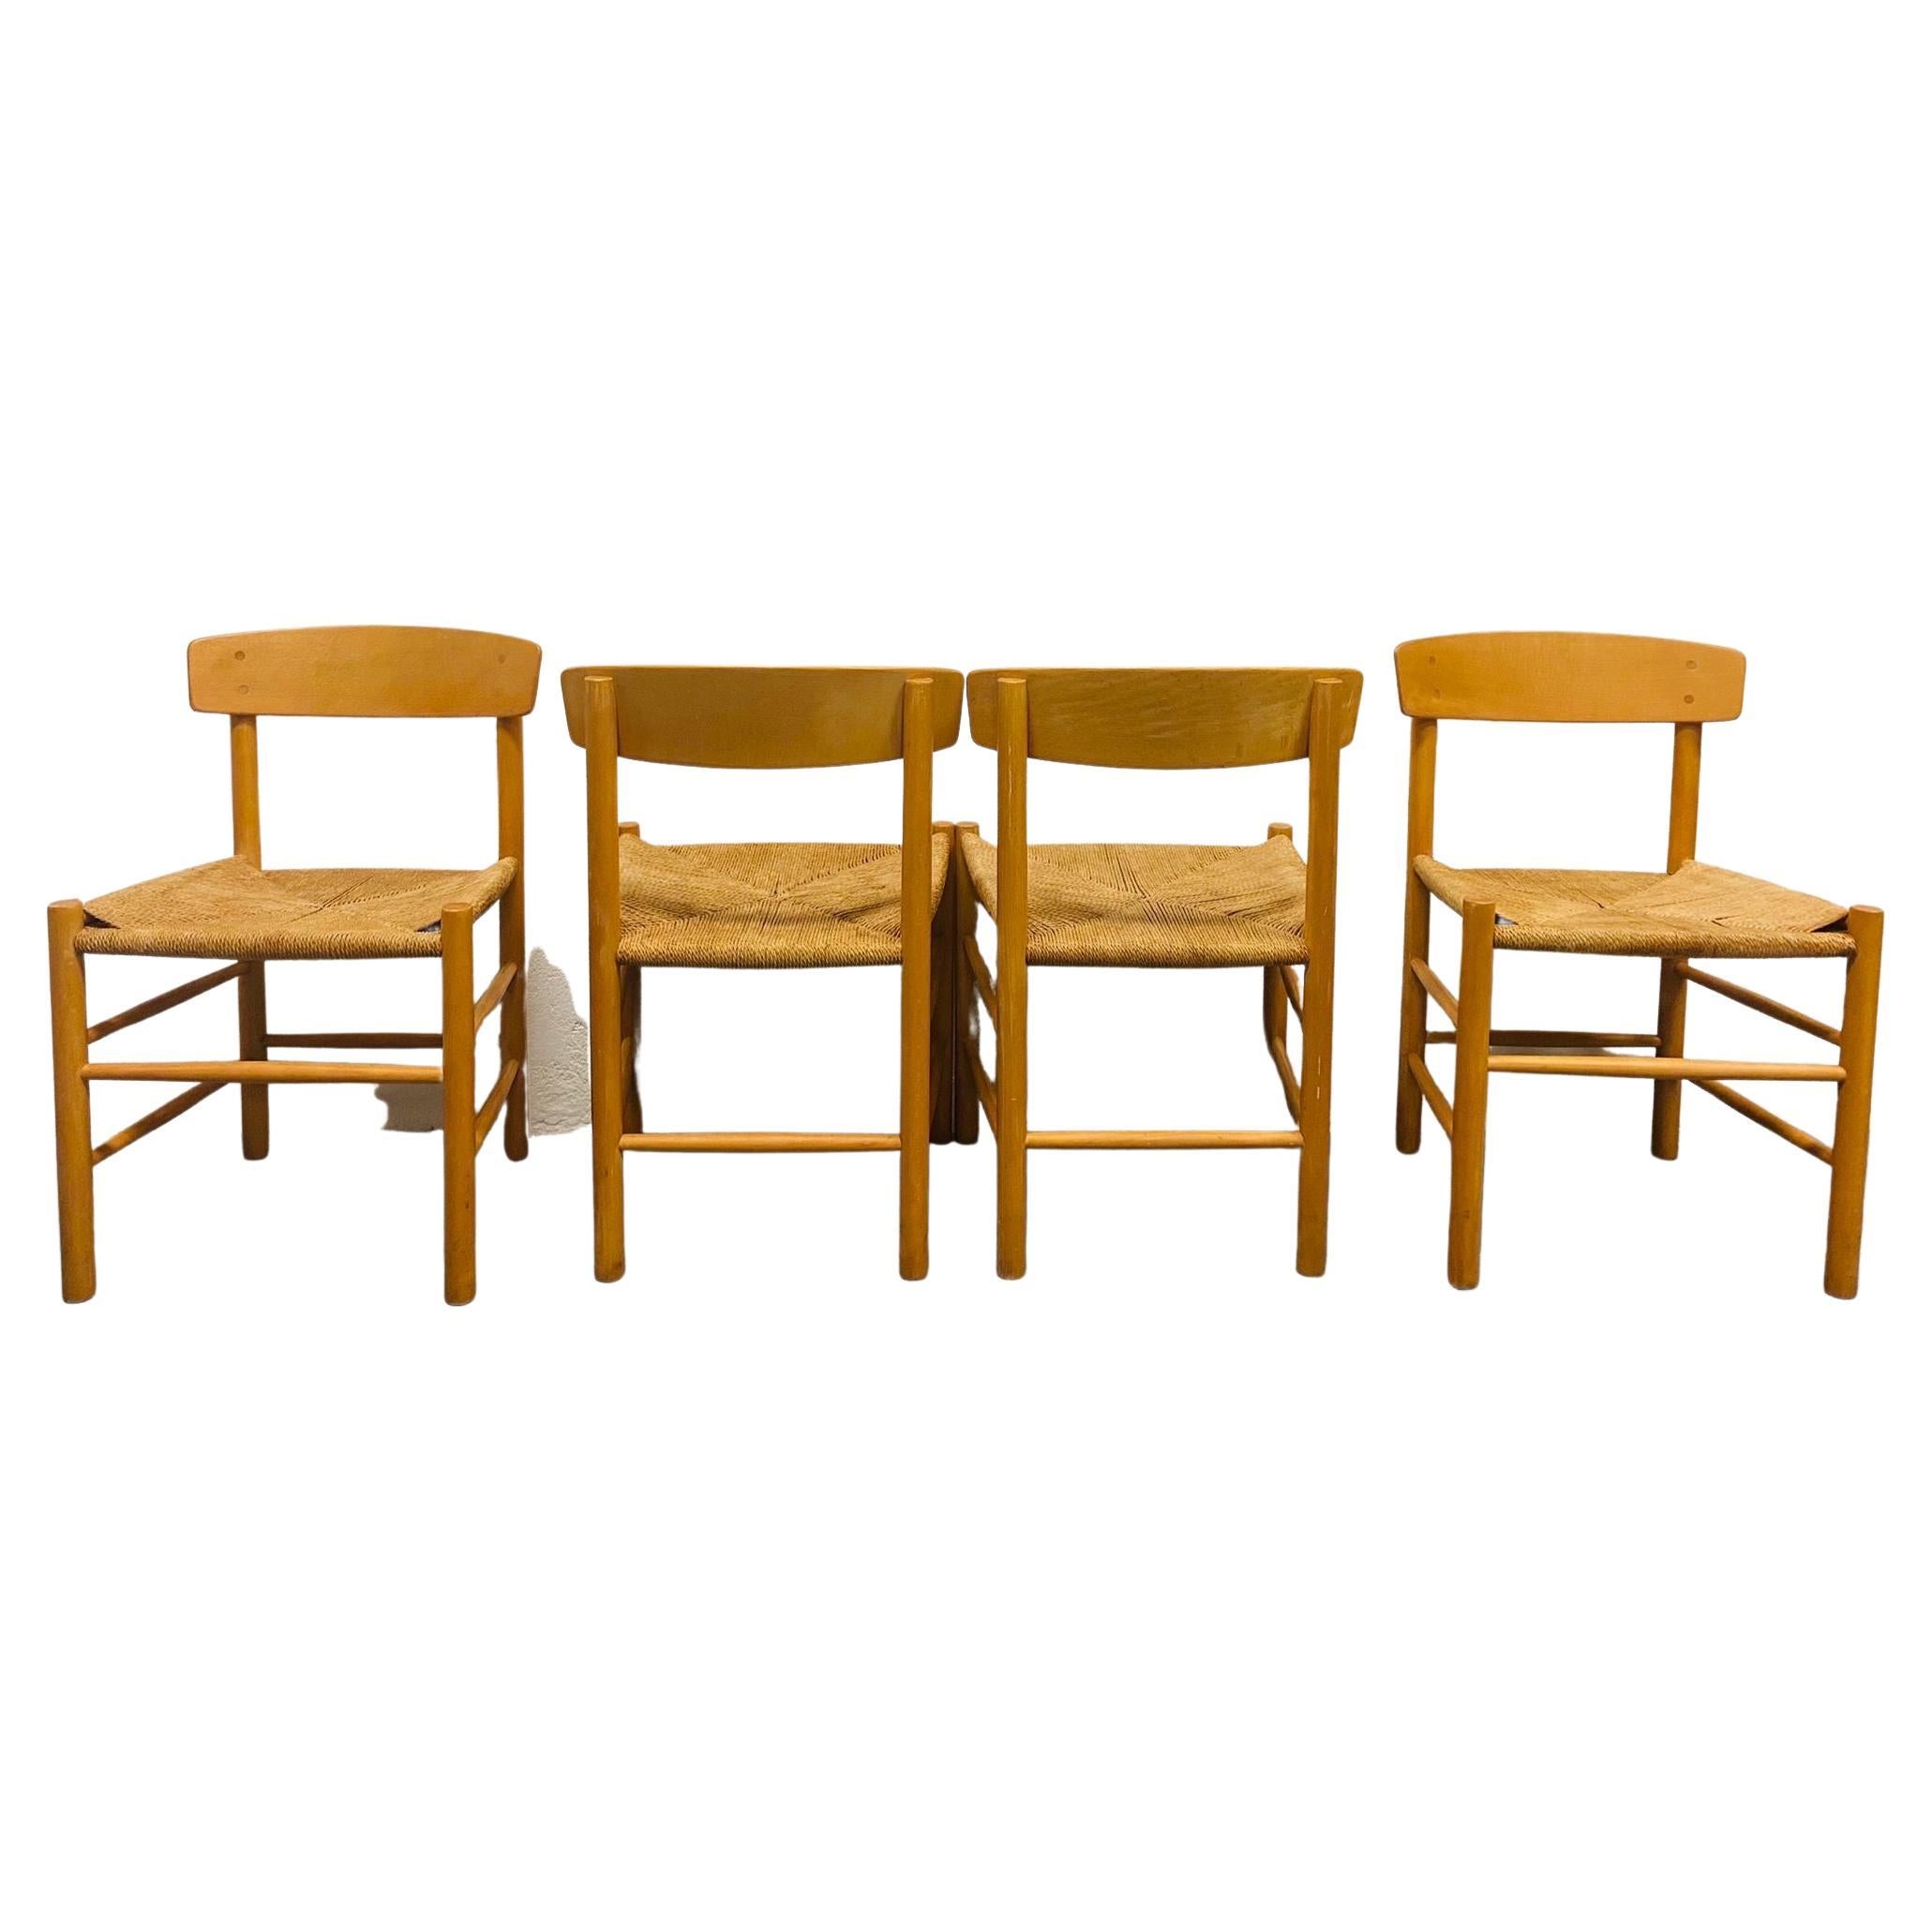 Mid-20th Century Borge Mogensen J39 Set of 4 Dining Chairs, Total Current Availability Is 16 For Sale